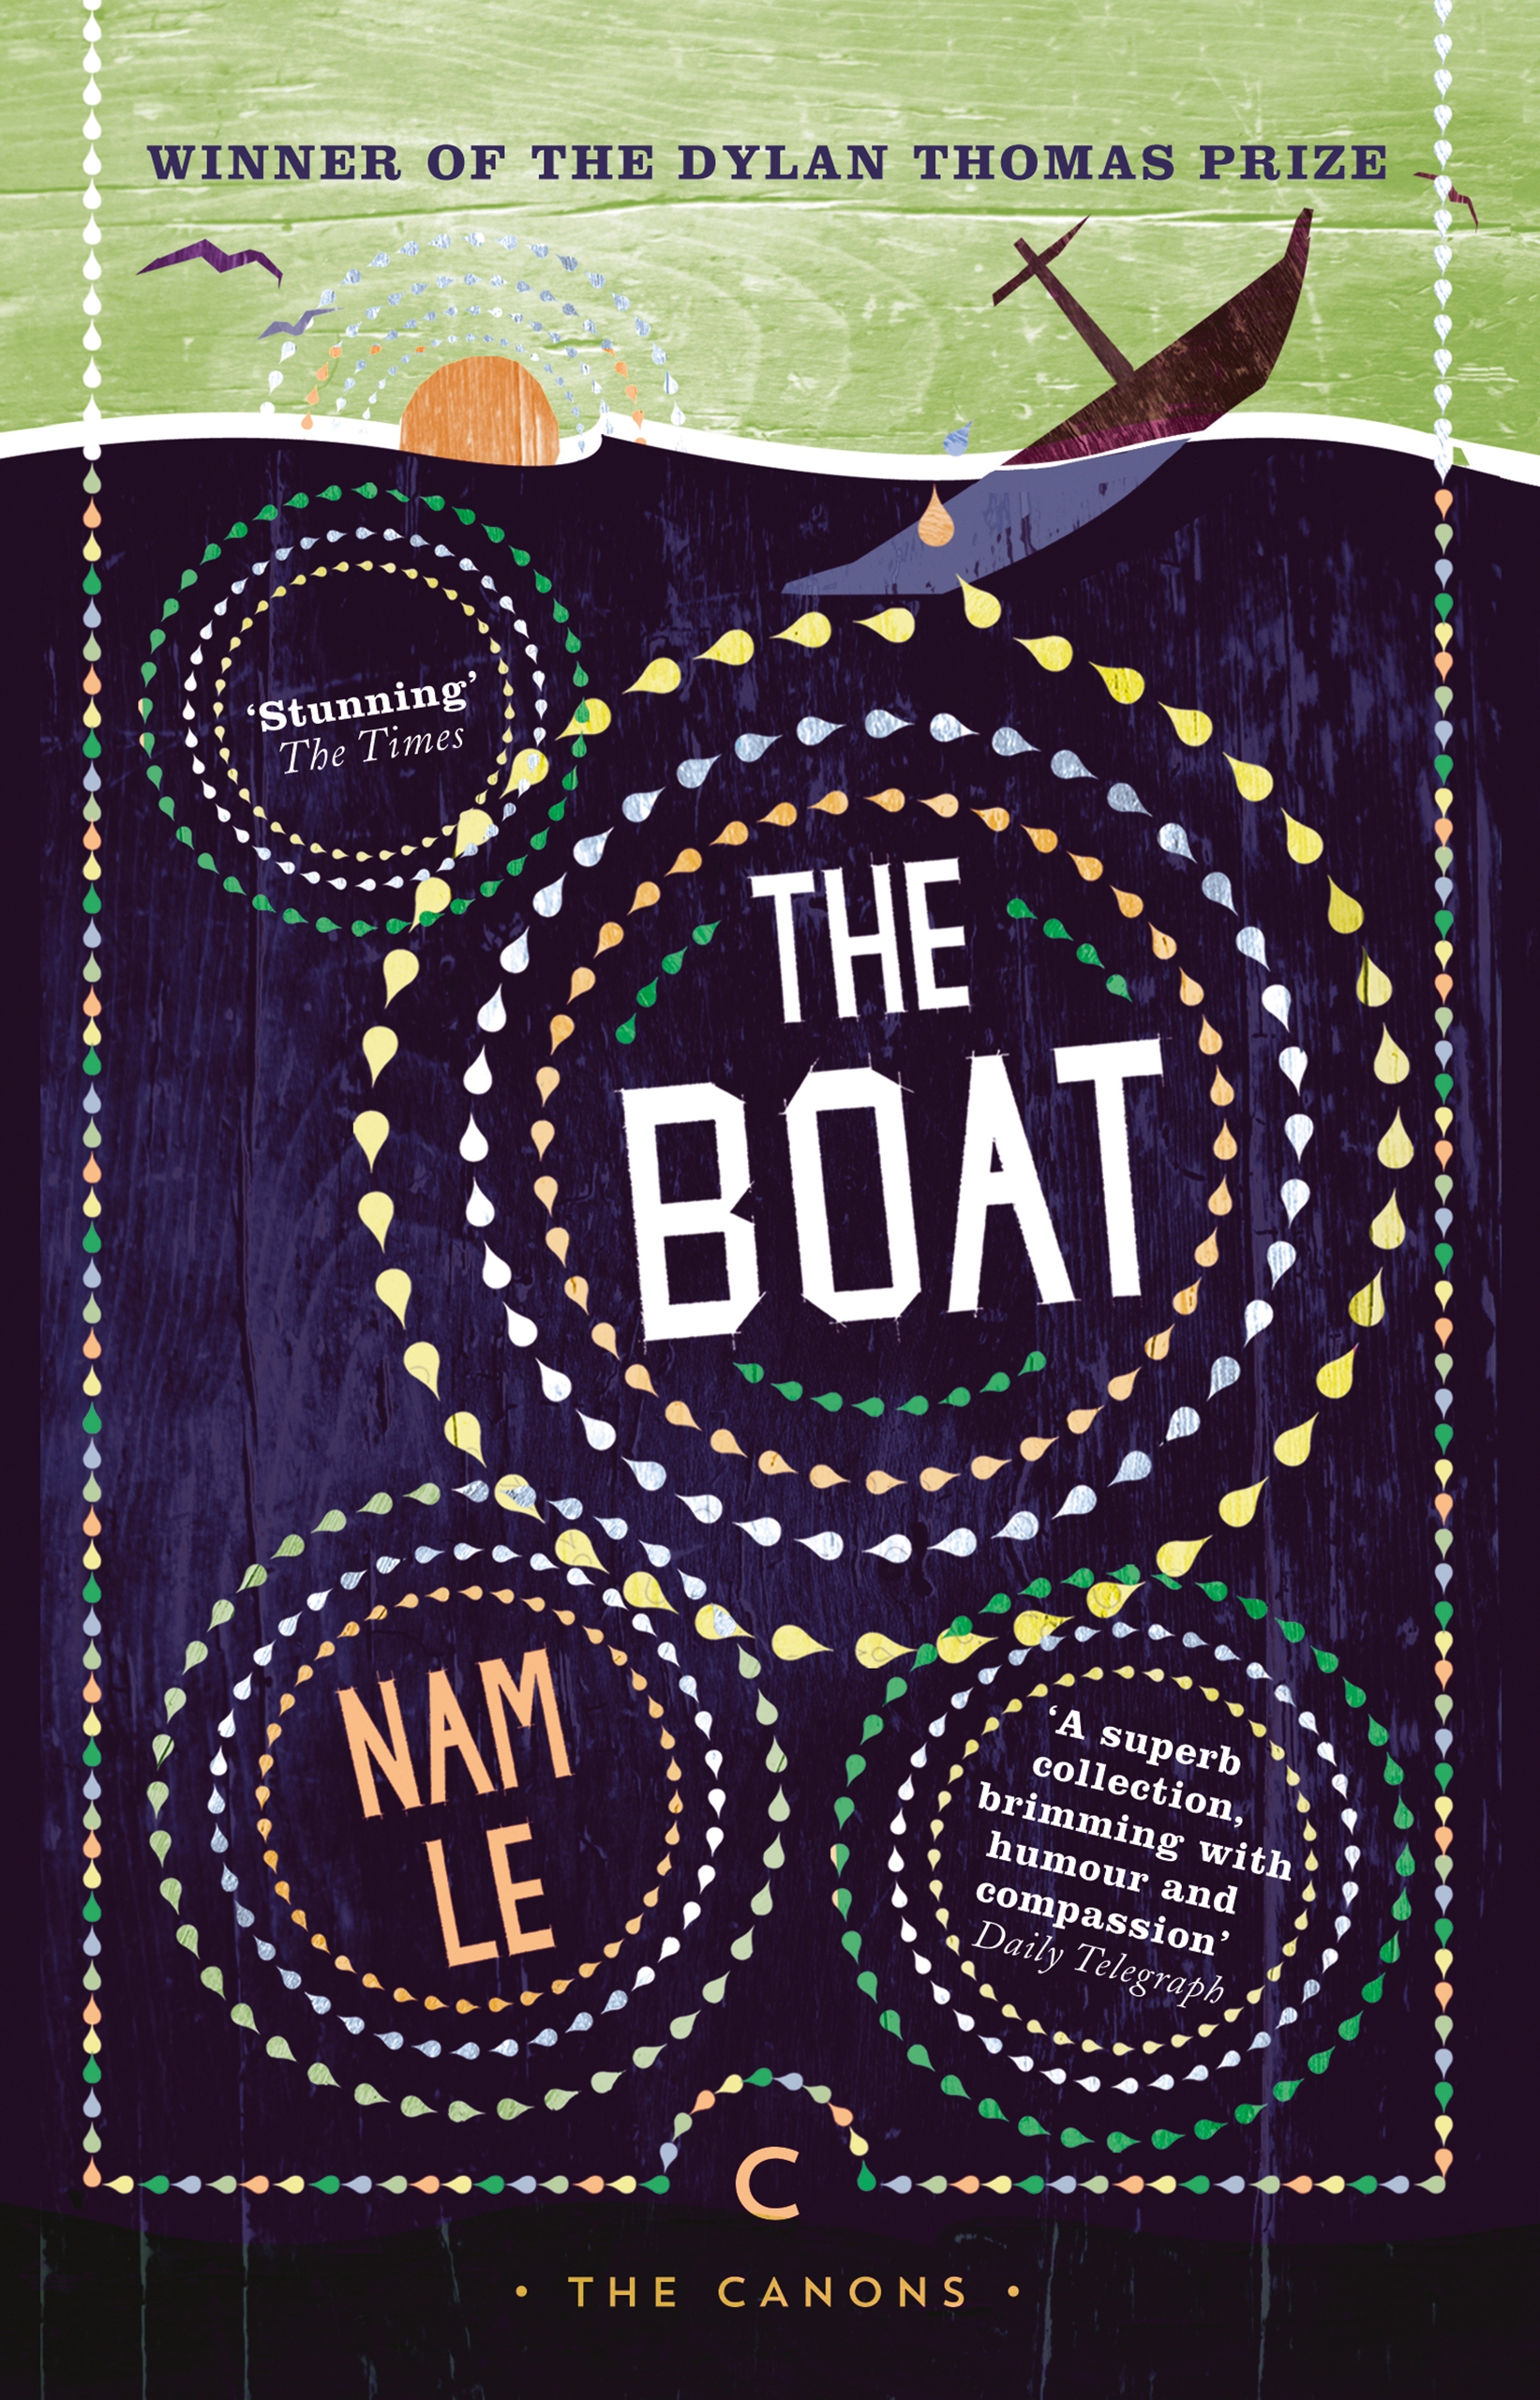 The Boat by Nam Le – Canongate Books